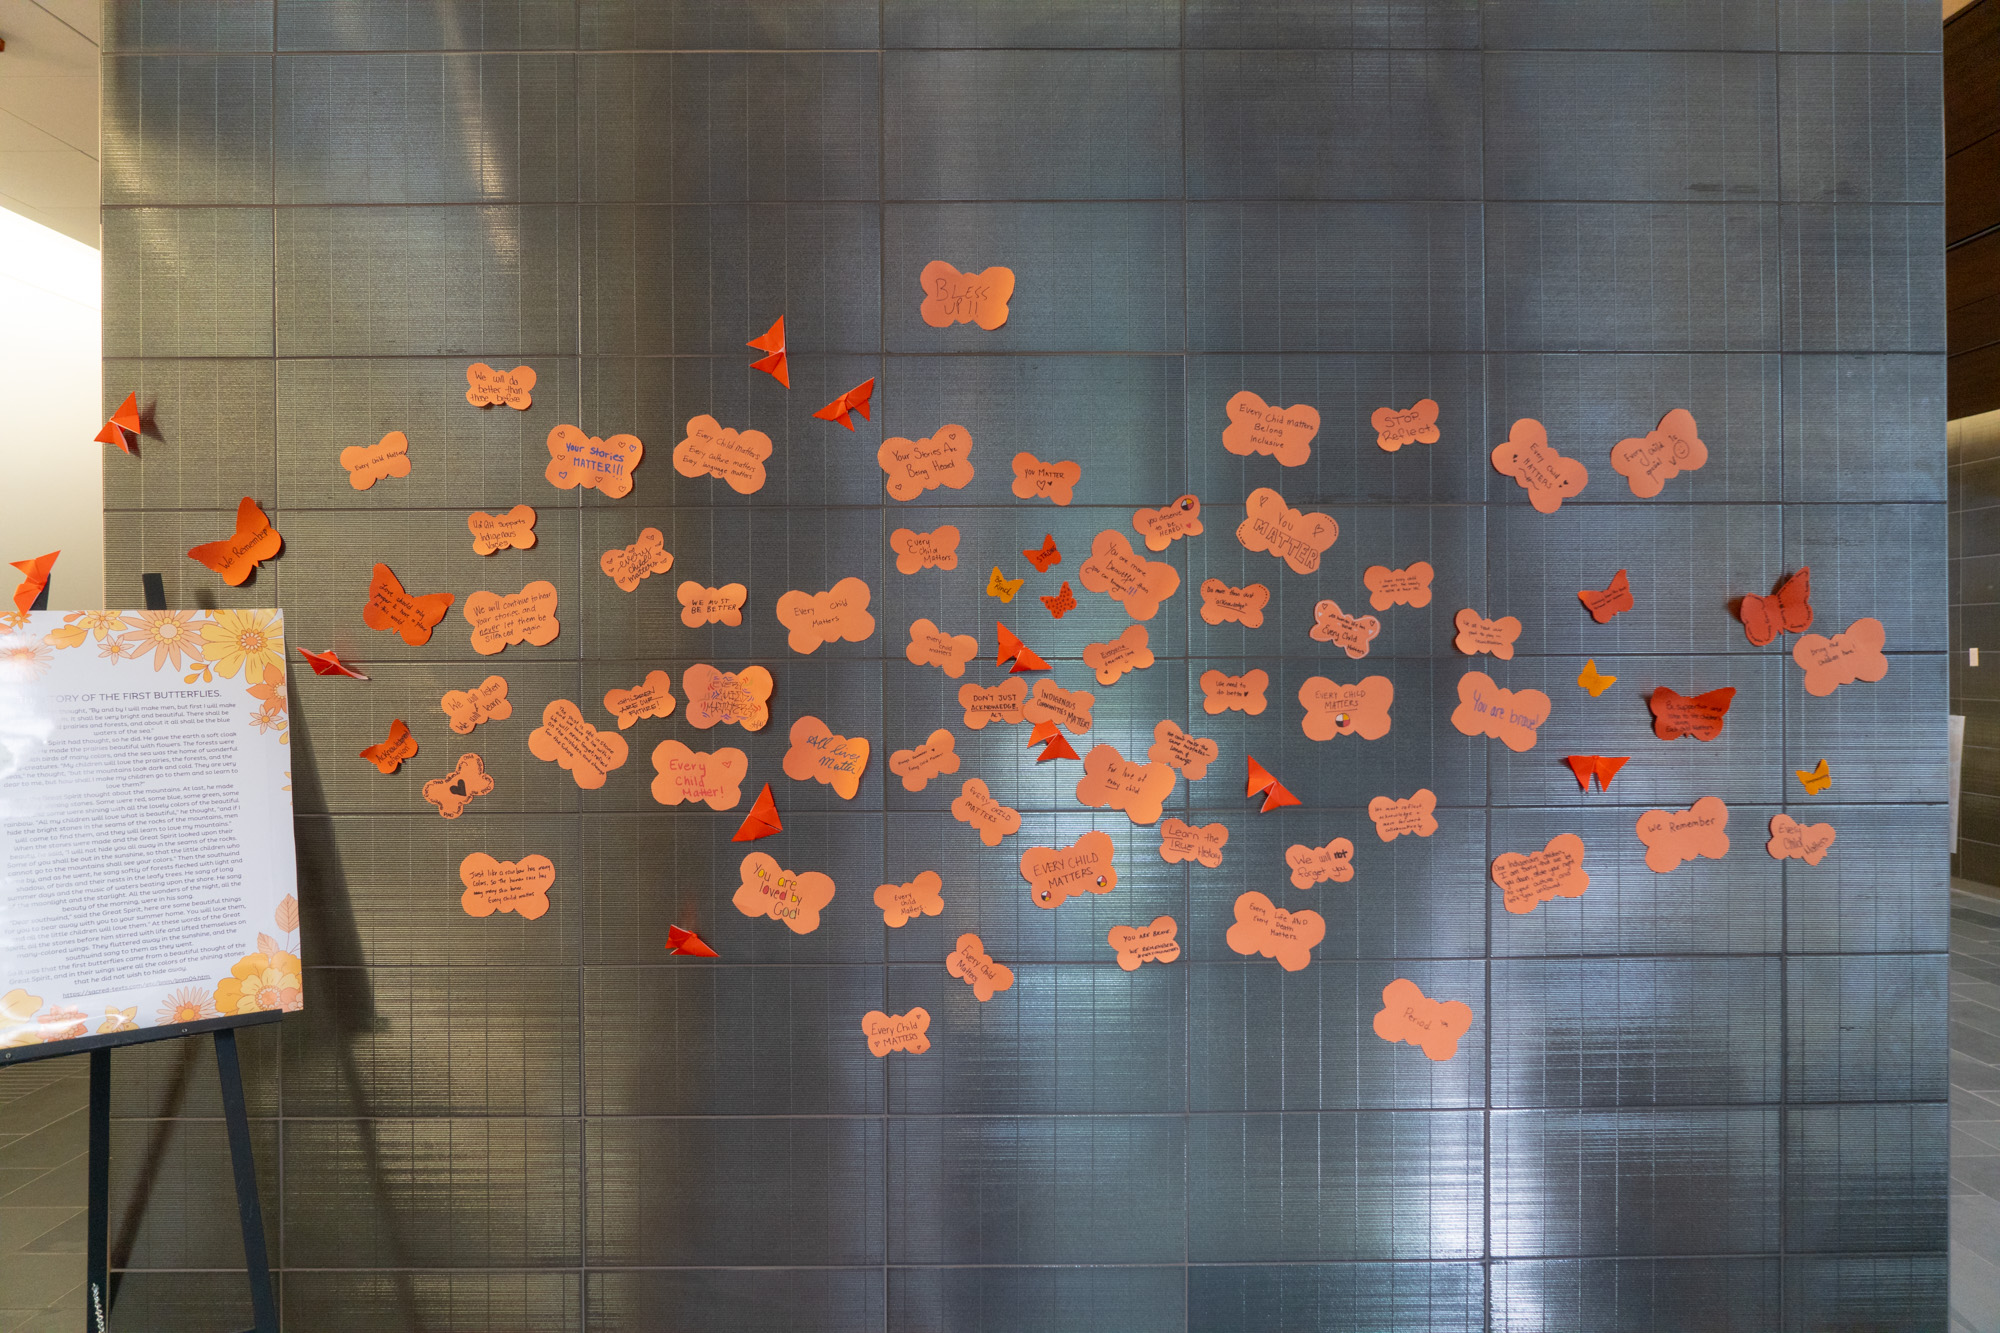 A wall with orange butterfly-shaped paper with written words and orange butterfly origami